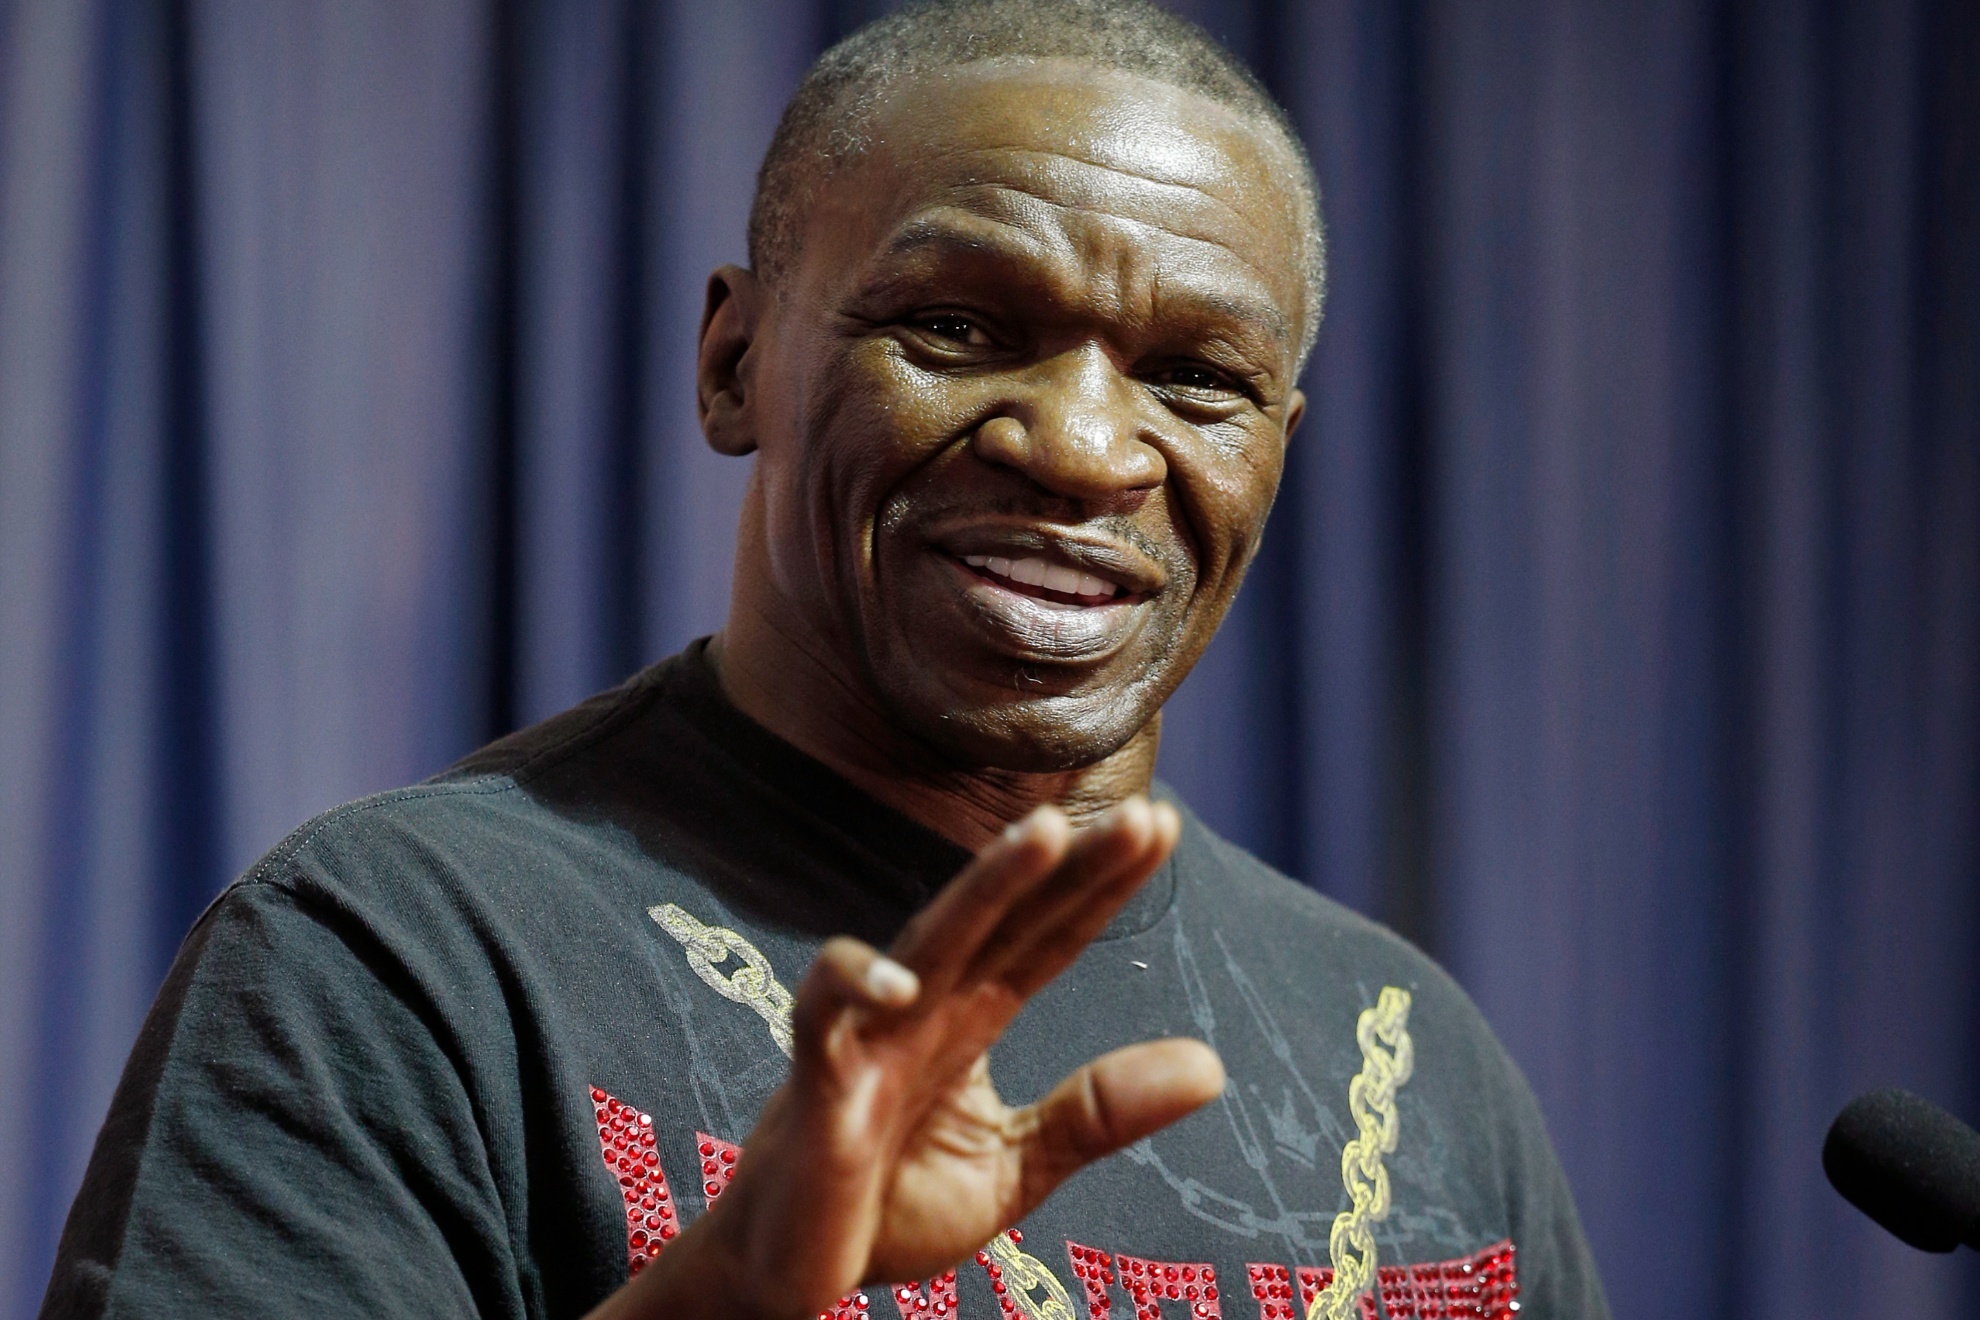 Boxer Floyd Mayweather Jr.s father and trainer Floyd Mayweather Sr. speaks during a media roundtable Thursday, April 30, 2015, in Las Vegas. Floyd Mayweather Jr. will face Manny Pacquiao in a welterweight boxing match in Las Vegas on May 2. (AP Photo/John Locher)